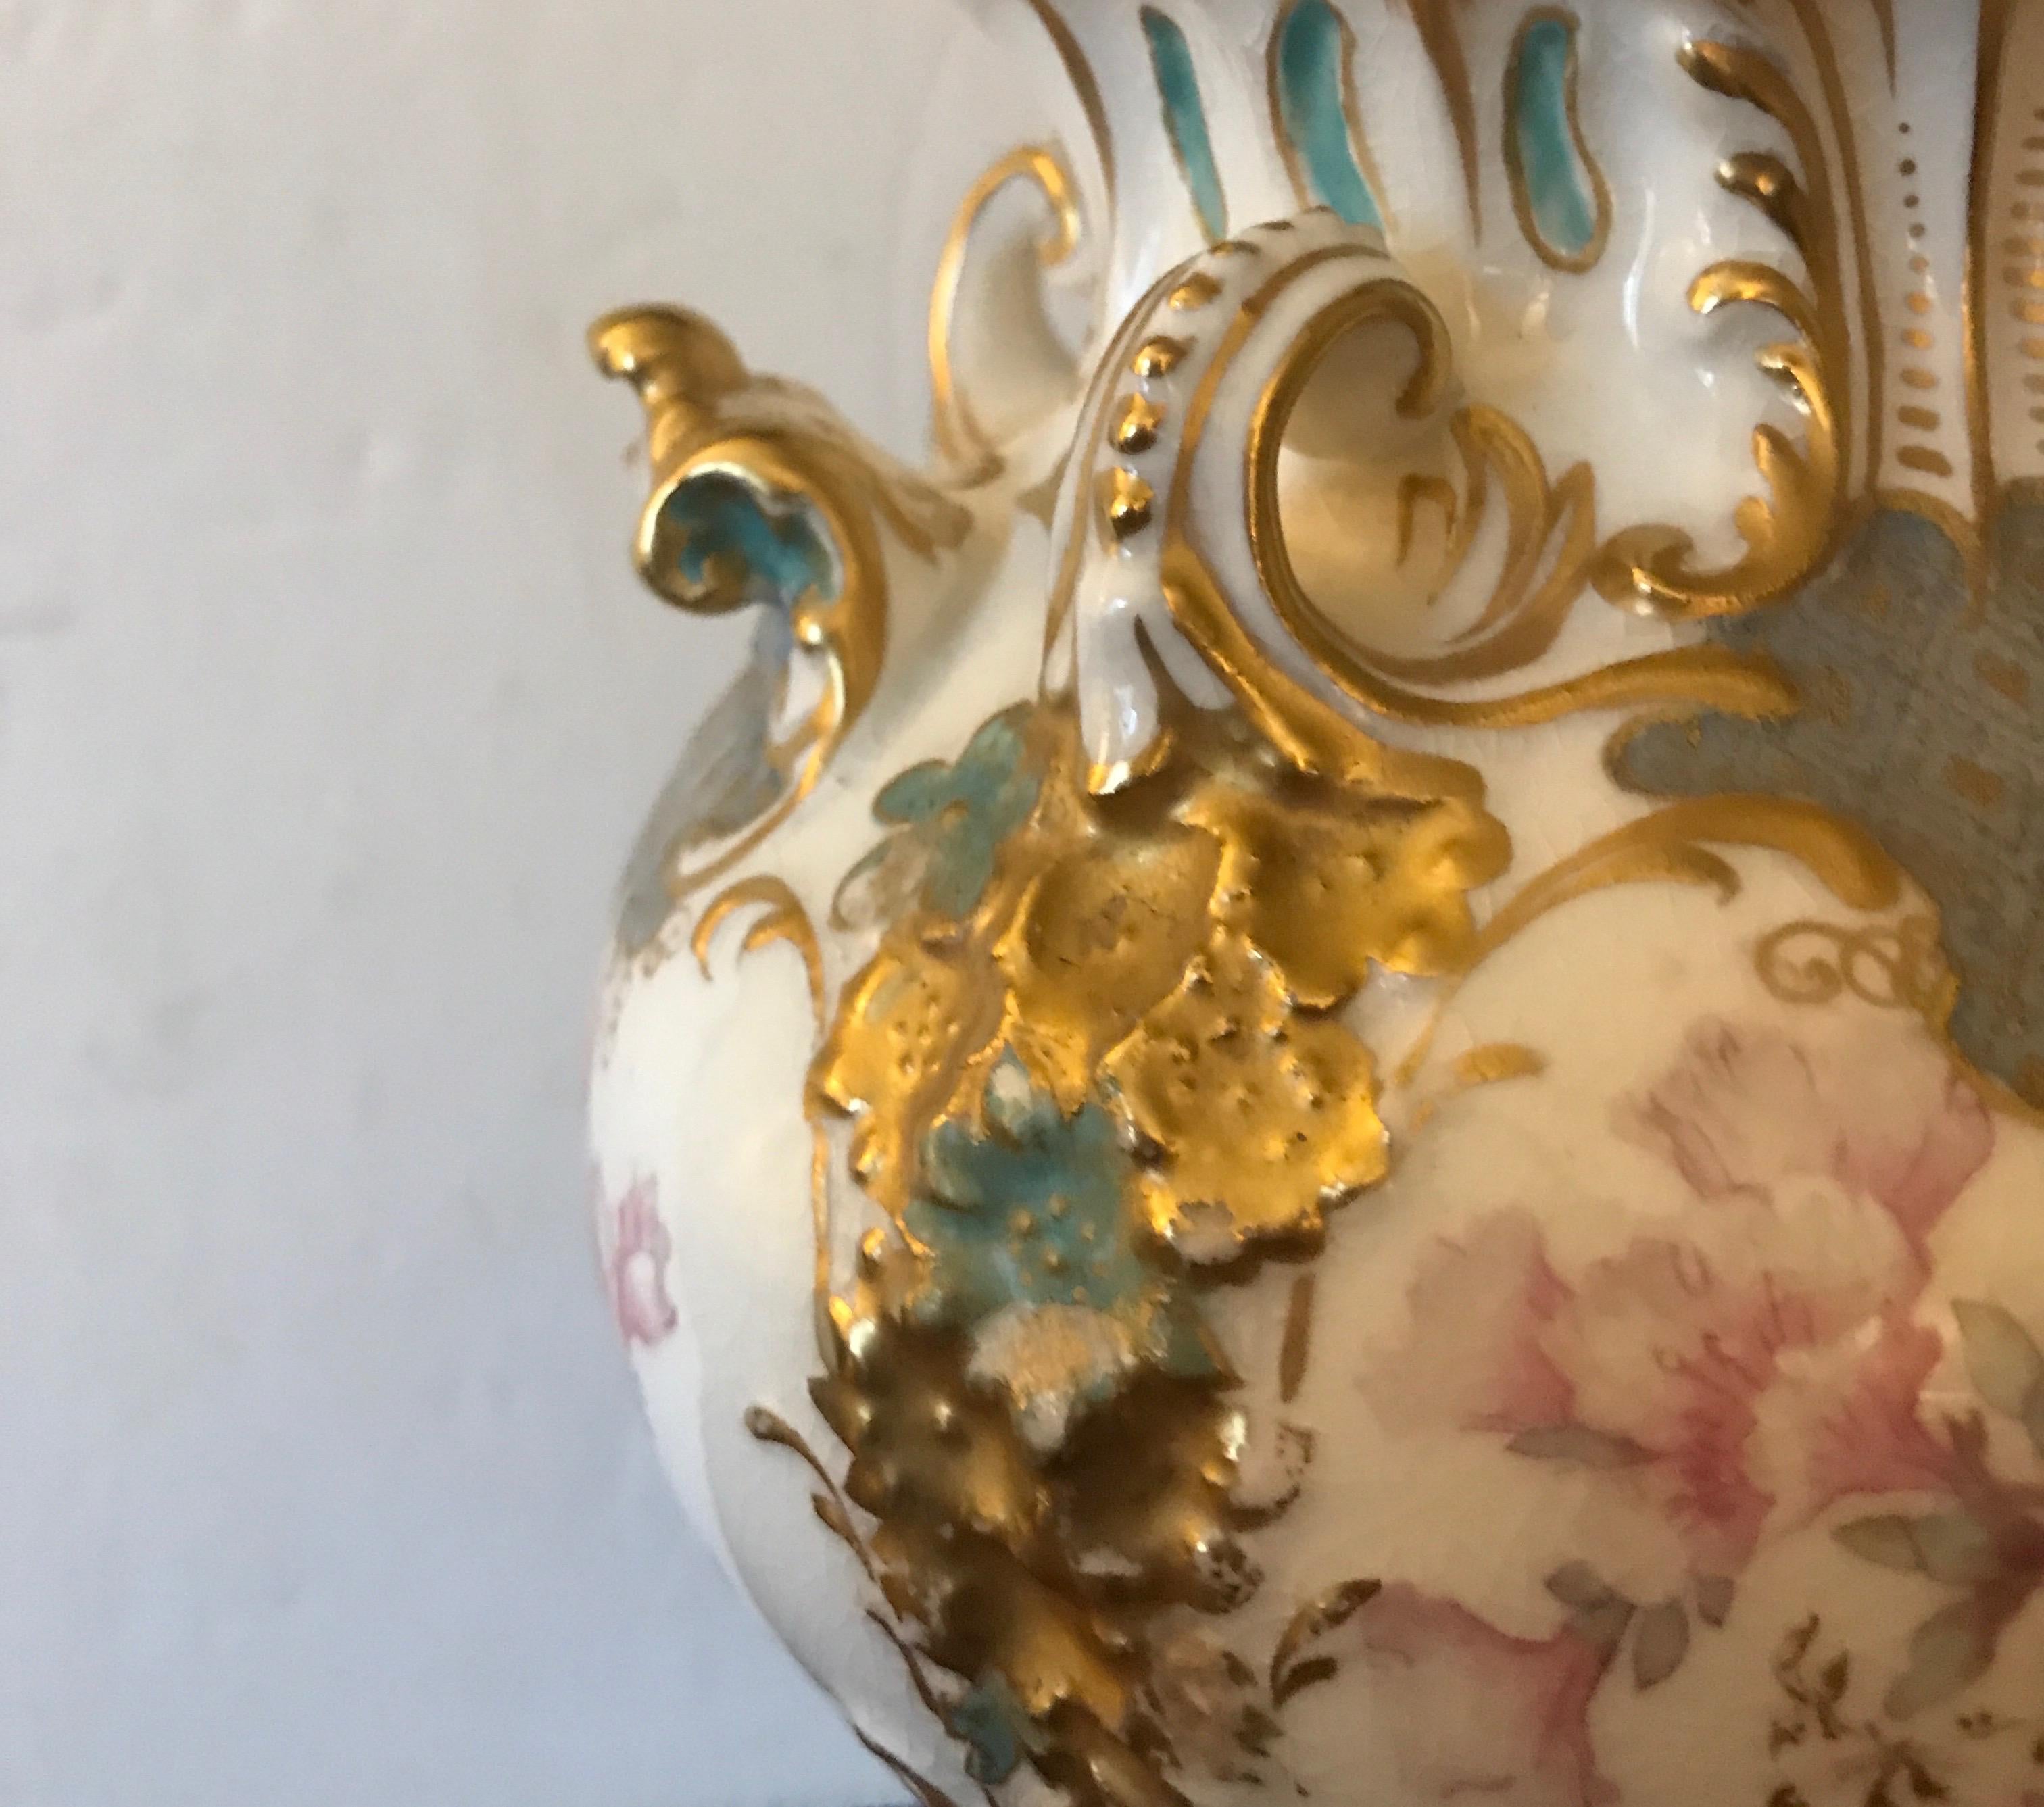 19th century English china vase with floral and gilt decoration,. Marked in red under-glaze with a crown and derby china in banner.